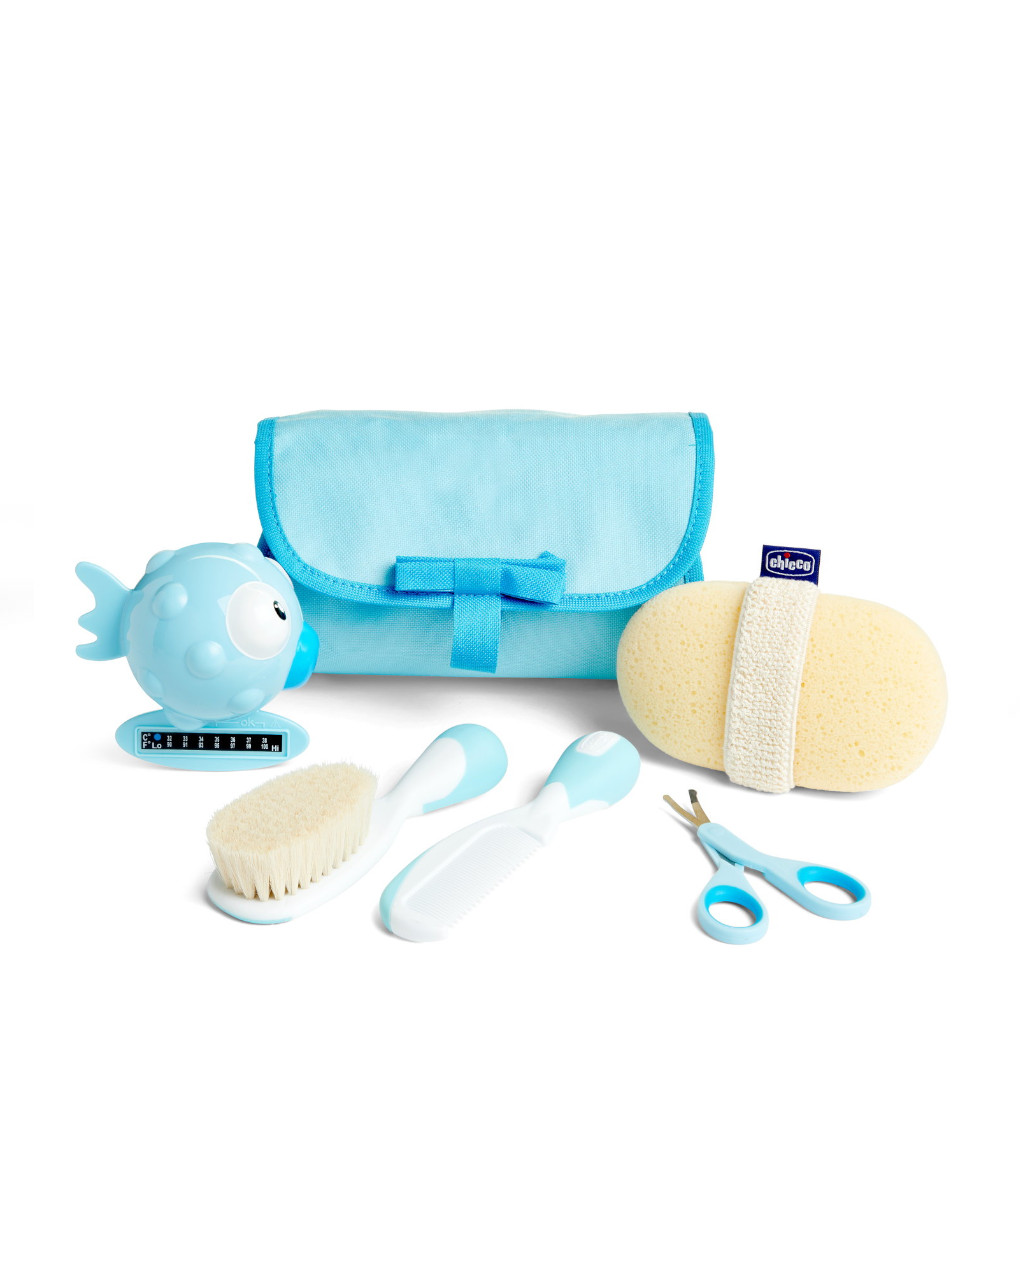 Set igiene 5in1 my first beauty azzurro 0m+ - chicco - Chicco